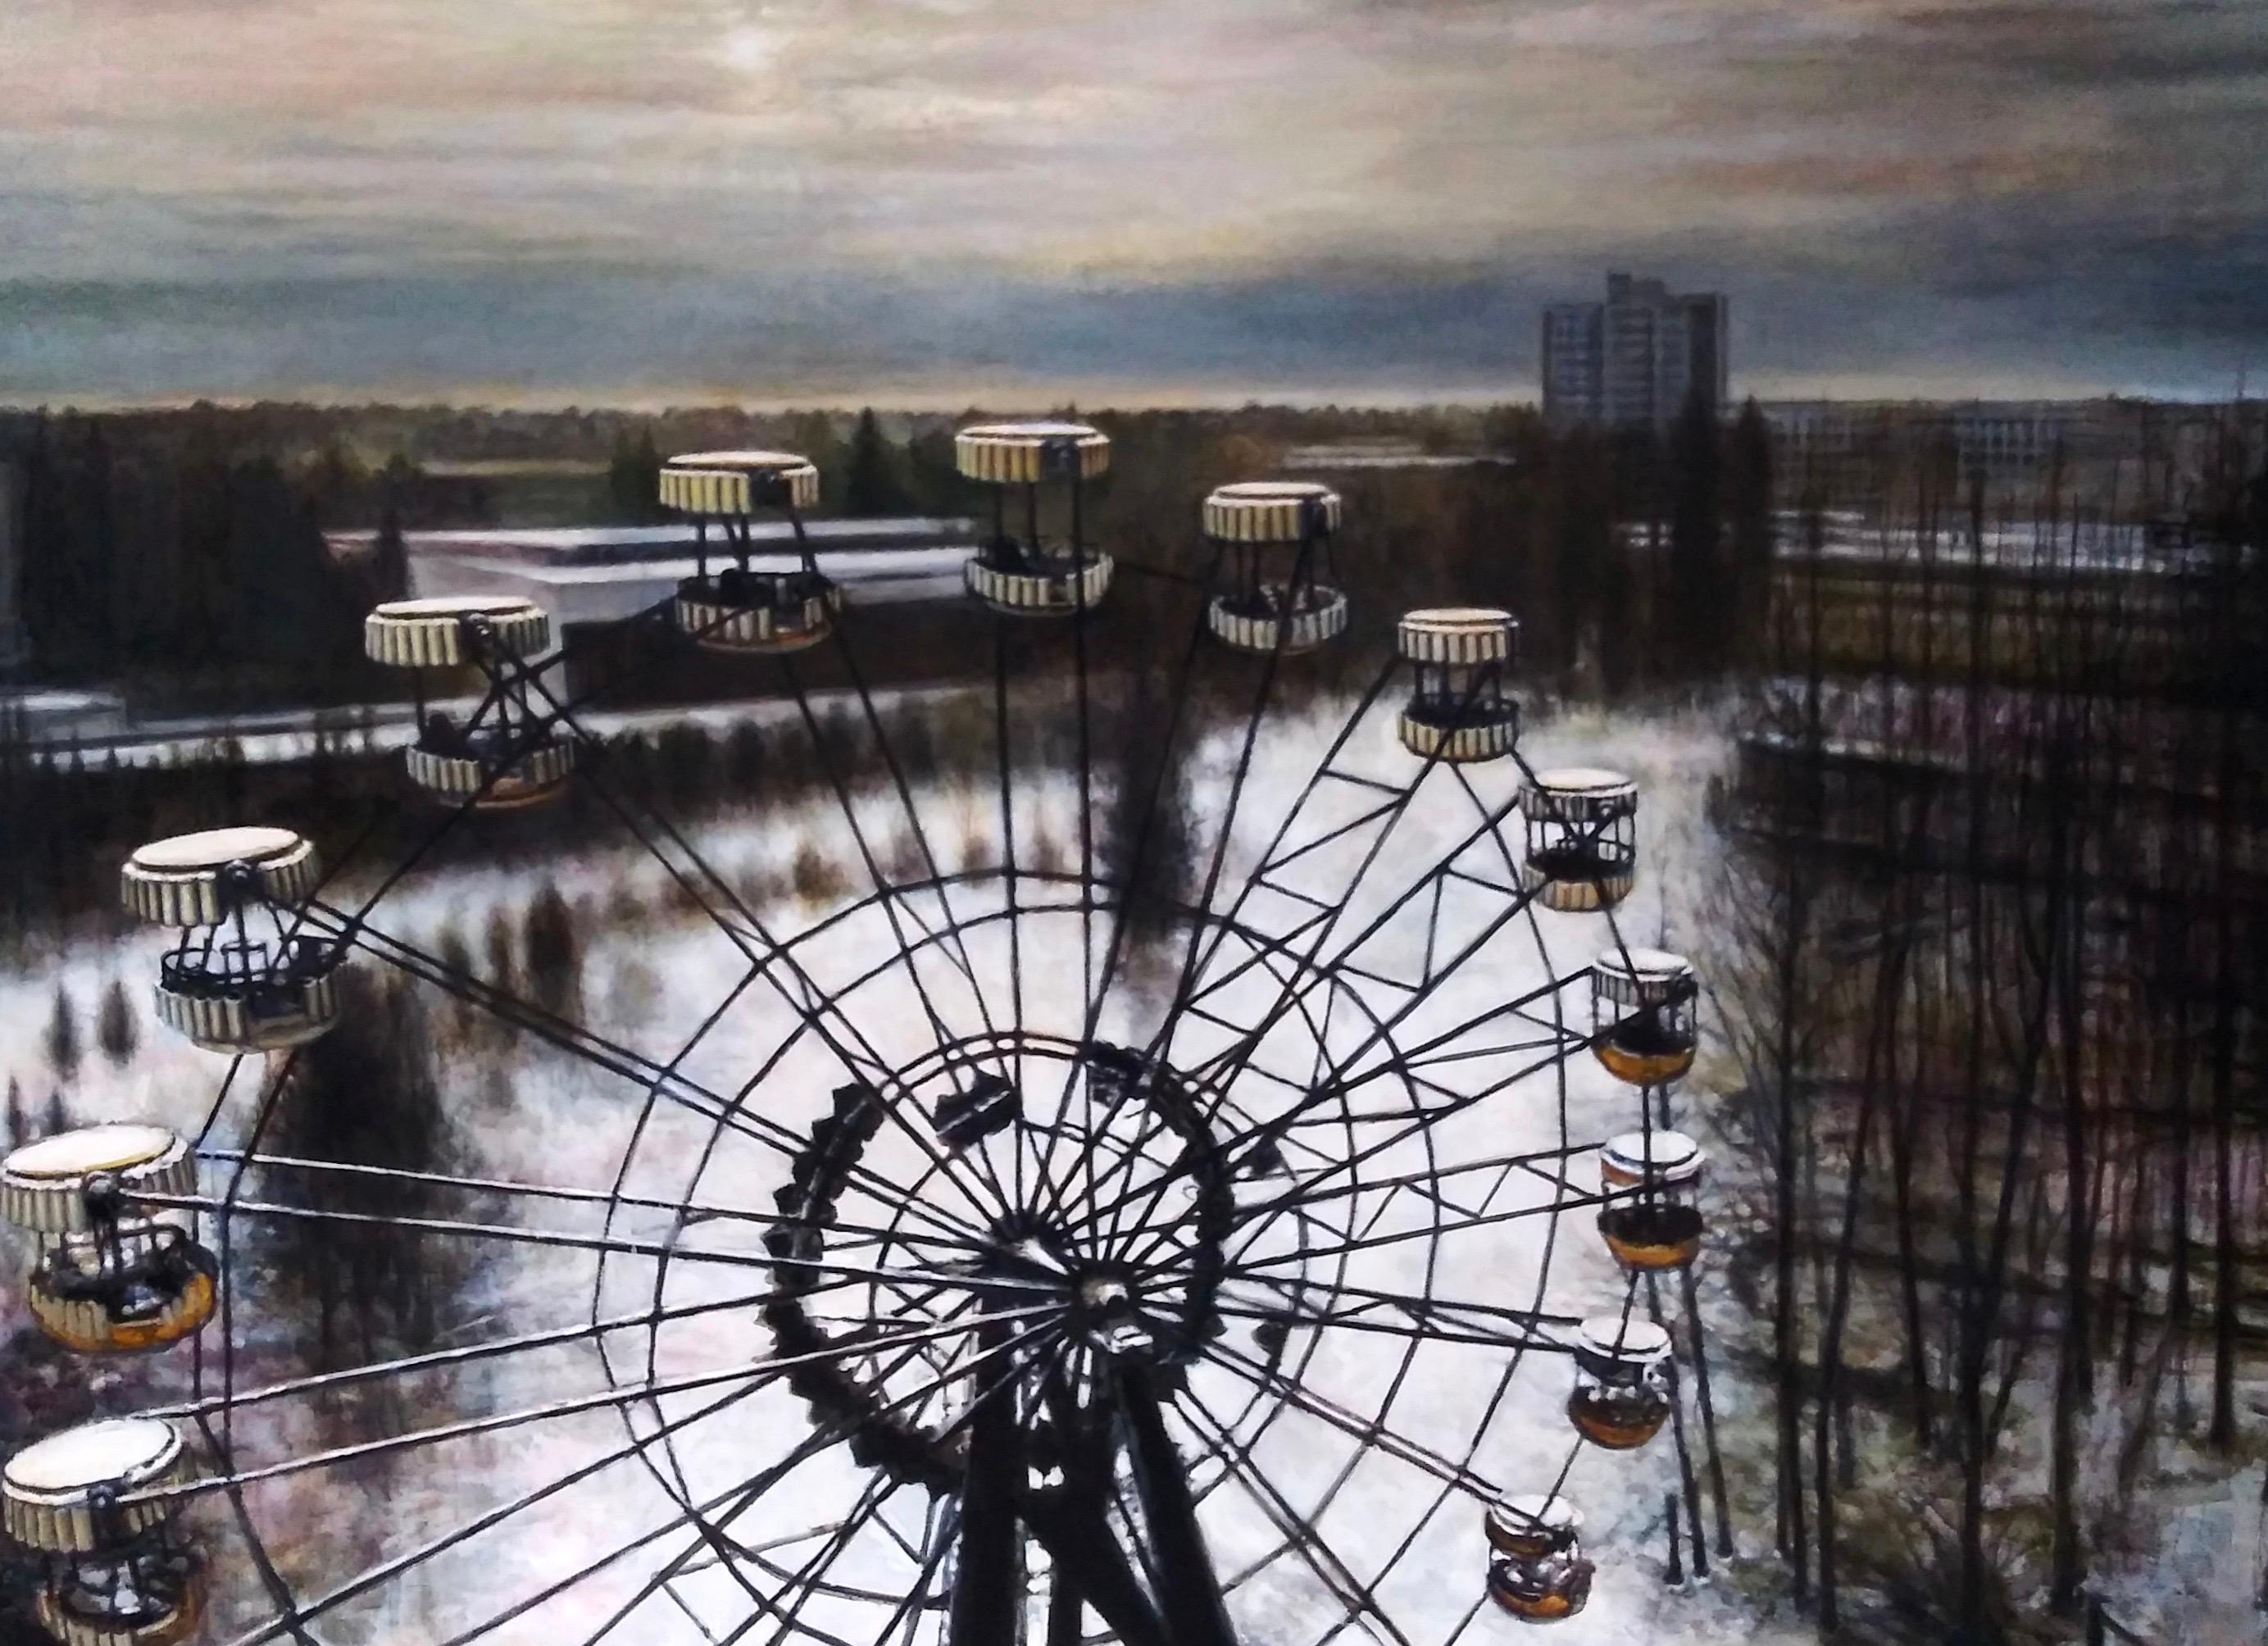 Lawrence Gipe Landscape Painting - Russian Drone Painting No. 6 (Ferris Wheel at Pripyat, 2016)